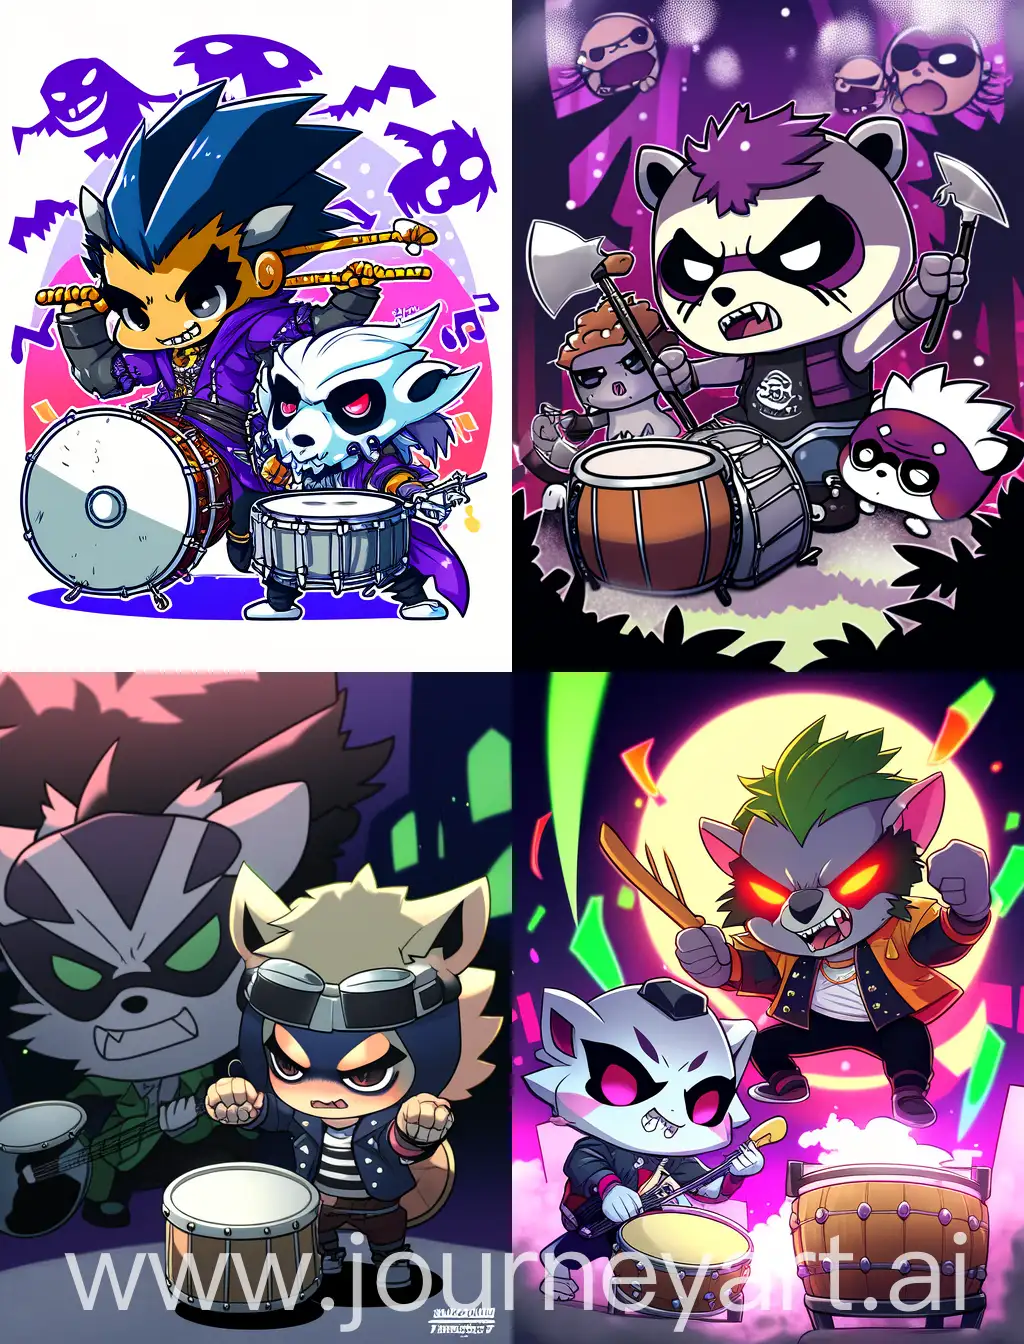 chibi racoon and anime guy playing drums, with spooky background, 